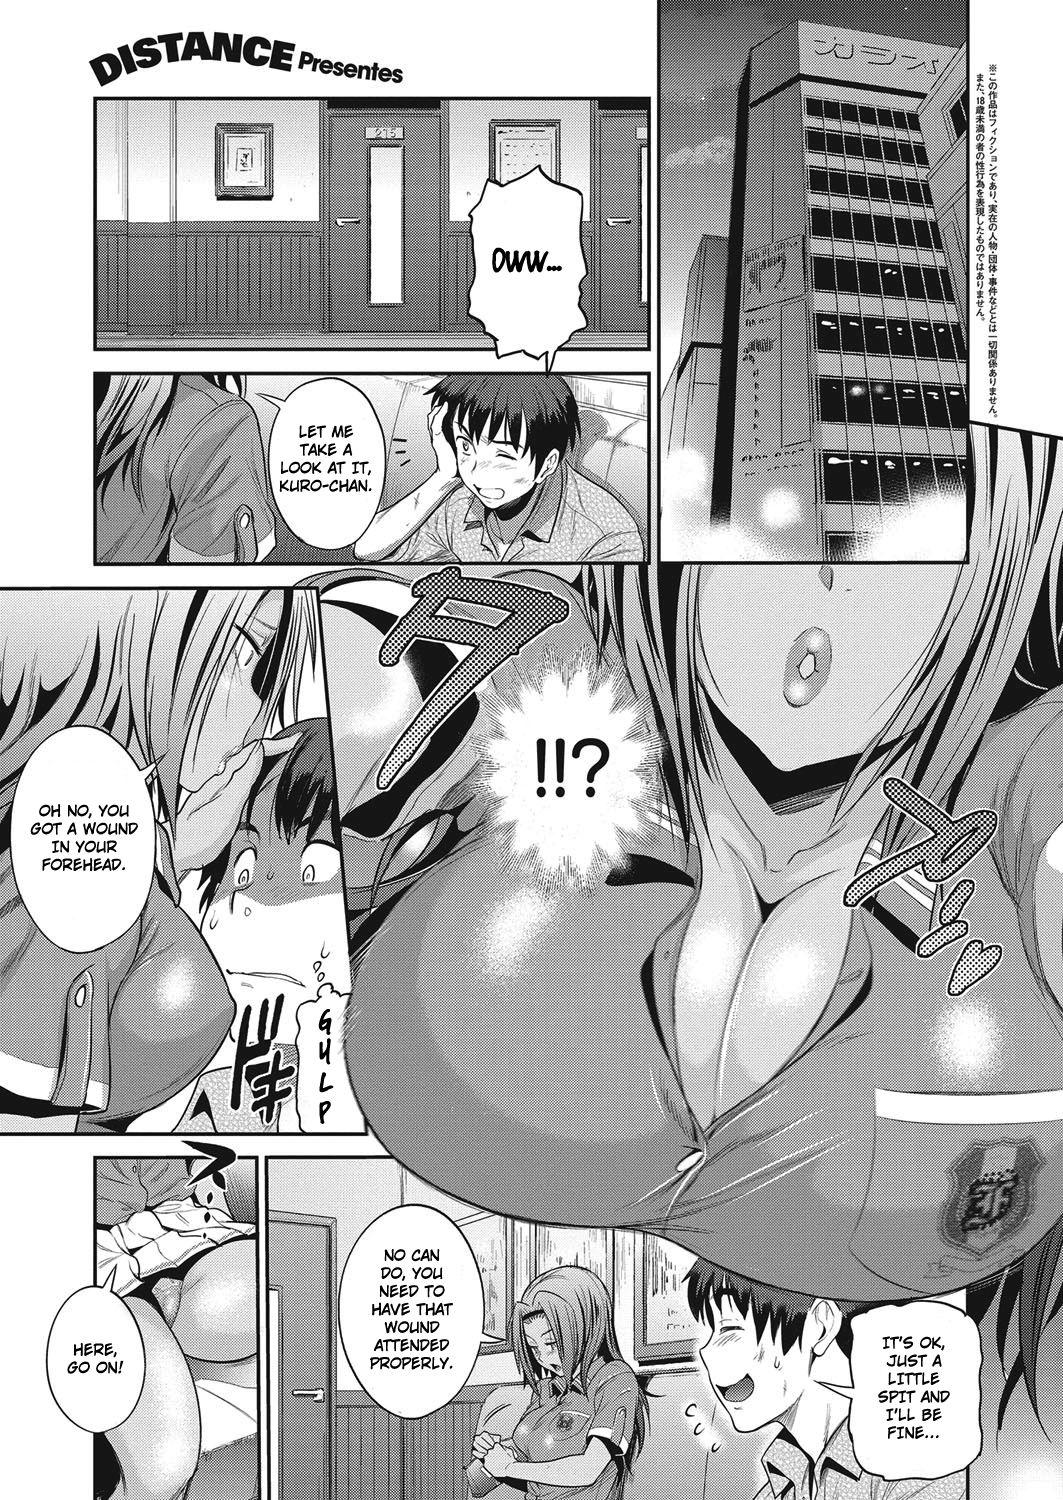 Whore [DISTANCE] Joshi Lacu! - Girls Lacrosse Club ~2 Years Later~ Ch. 3 (COMIC ExE 04) [English] [TripleSevenScans] [Digital] Gritona - Page 1